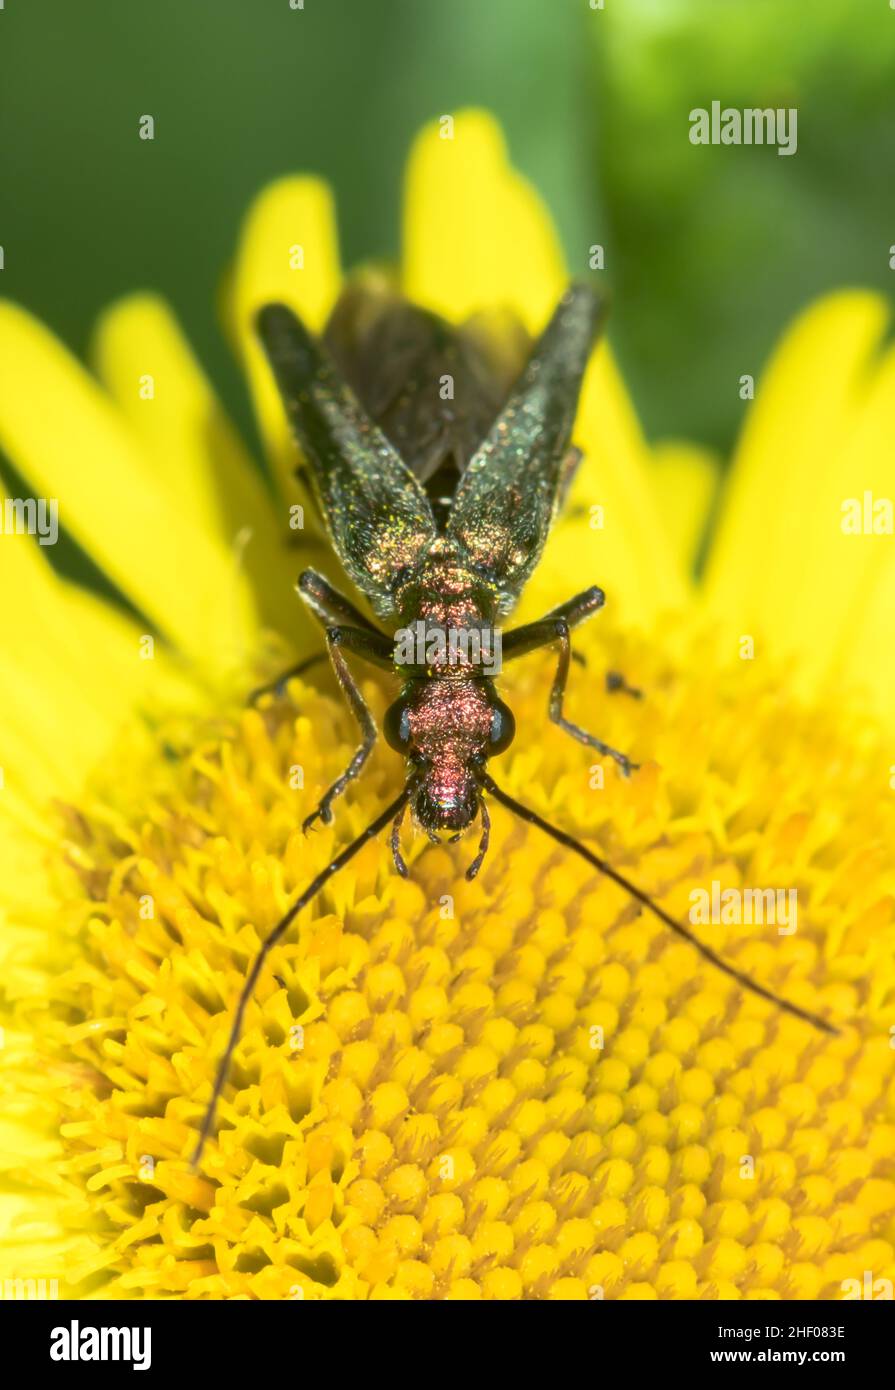 Fausse huile femelle gravid (Oedemera lurida), OEDEMERIDAE.Sussex, Royaume-Uni Banque D'Images